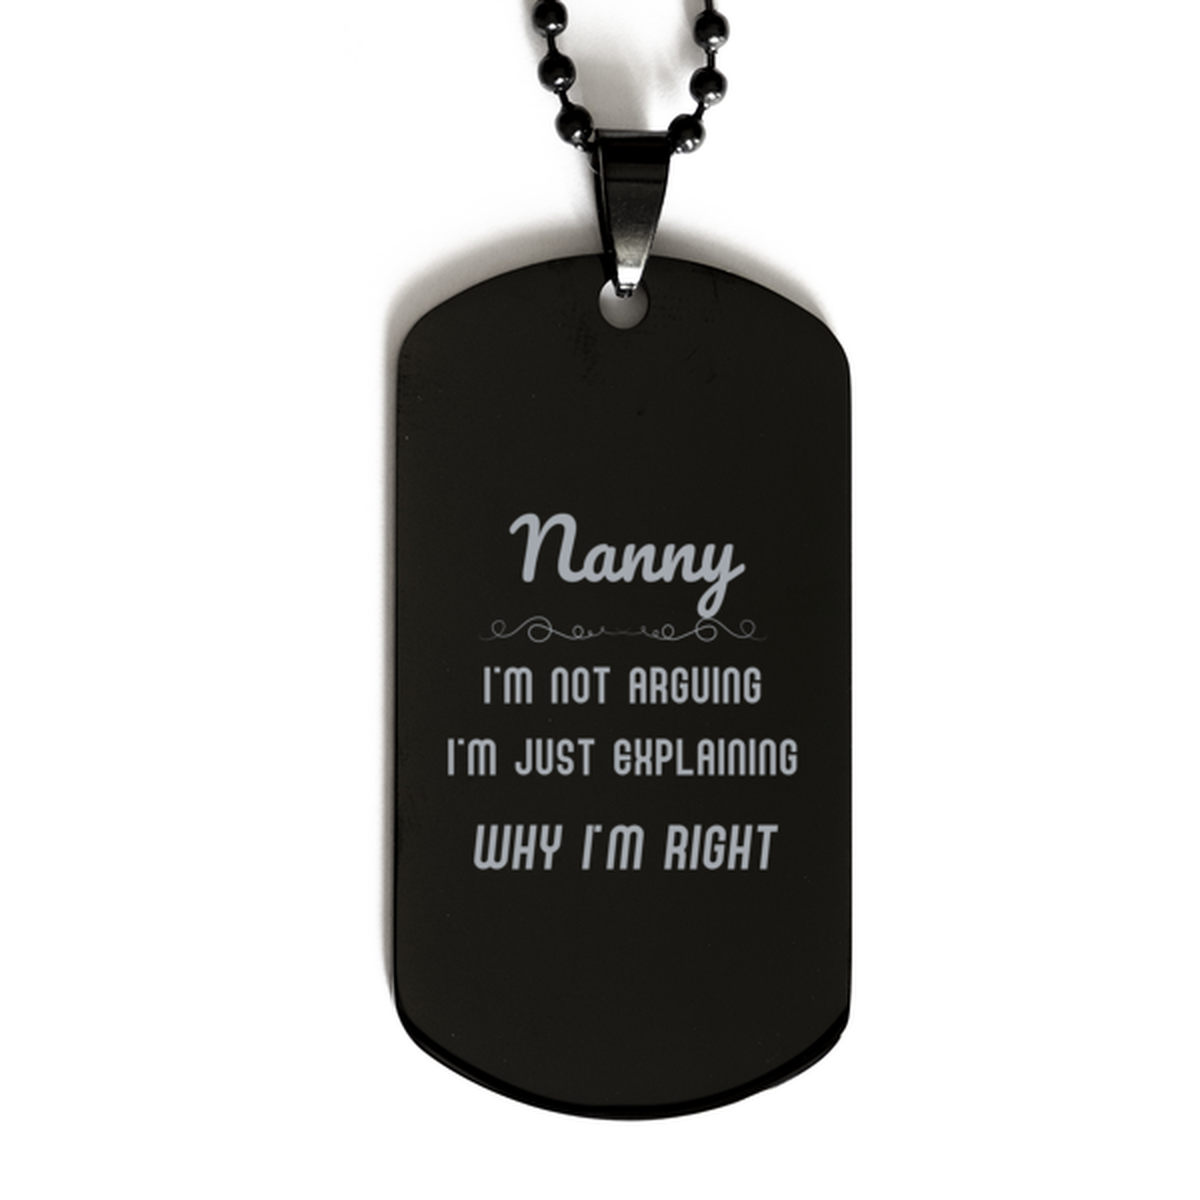 Nanny I'm not Arguing. I'm Just Explaining Why I'm RIGHT Black Dog Tag, Funny Saying Quote Nanny Gifts For Nanny Graduation Birthday Christmas Gifts for Men Women Coworker